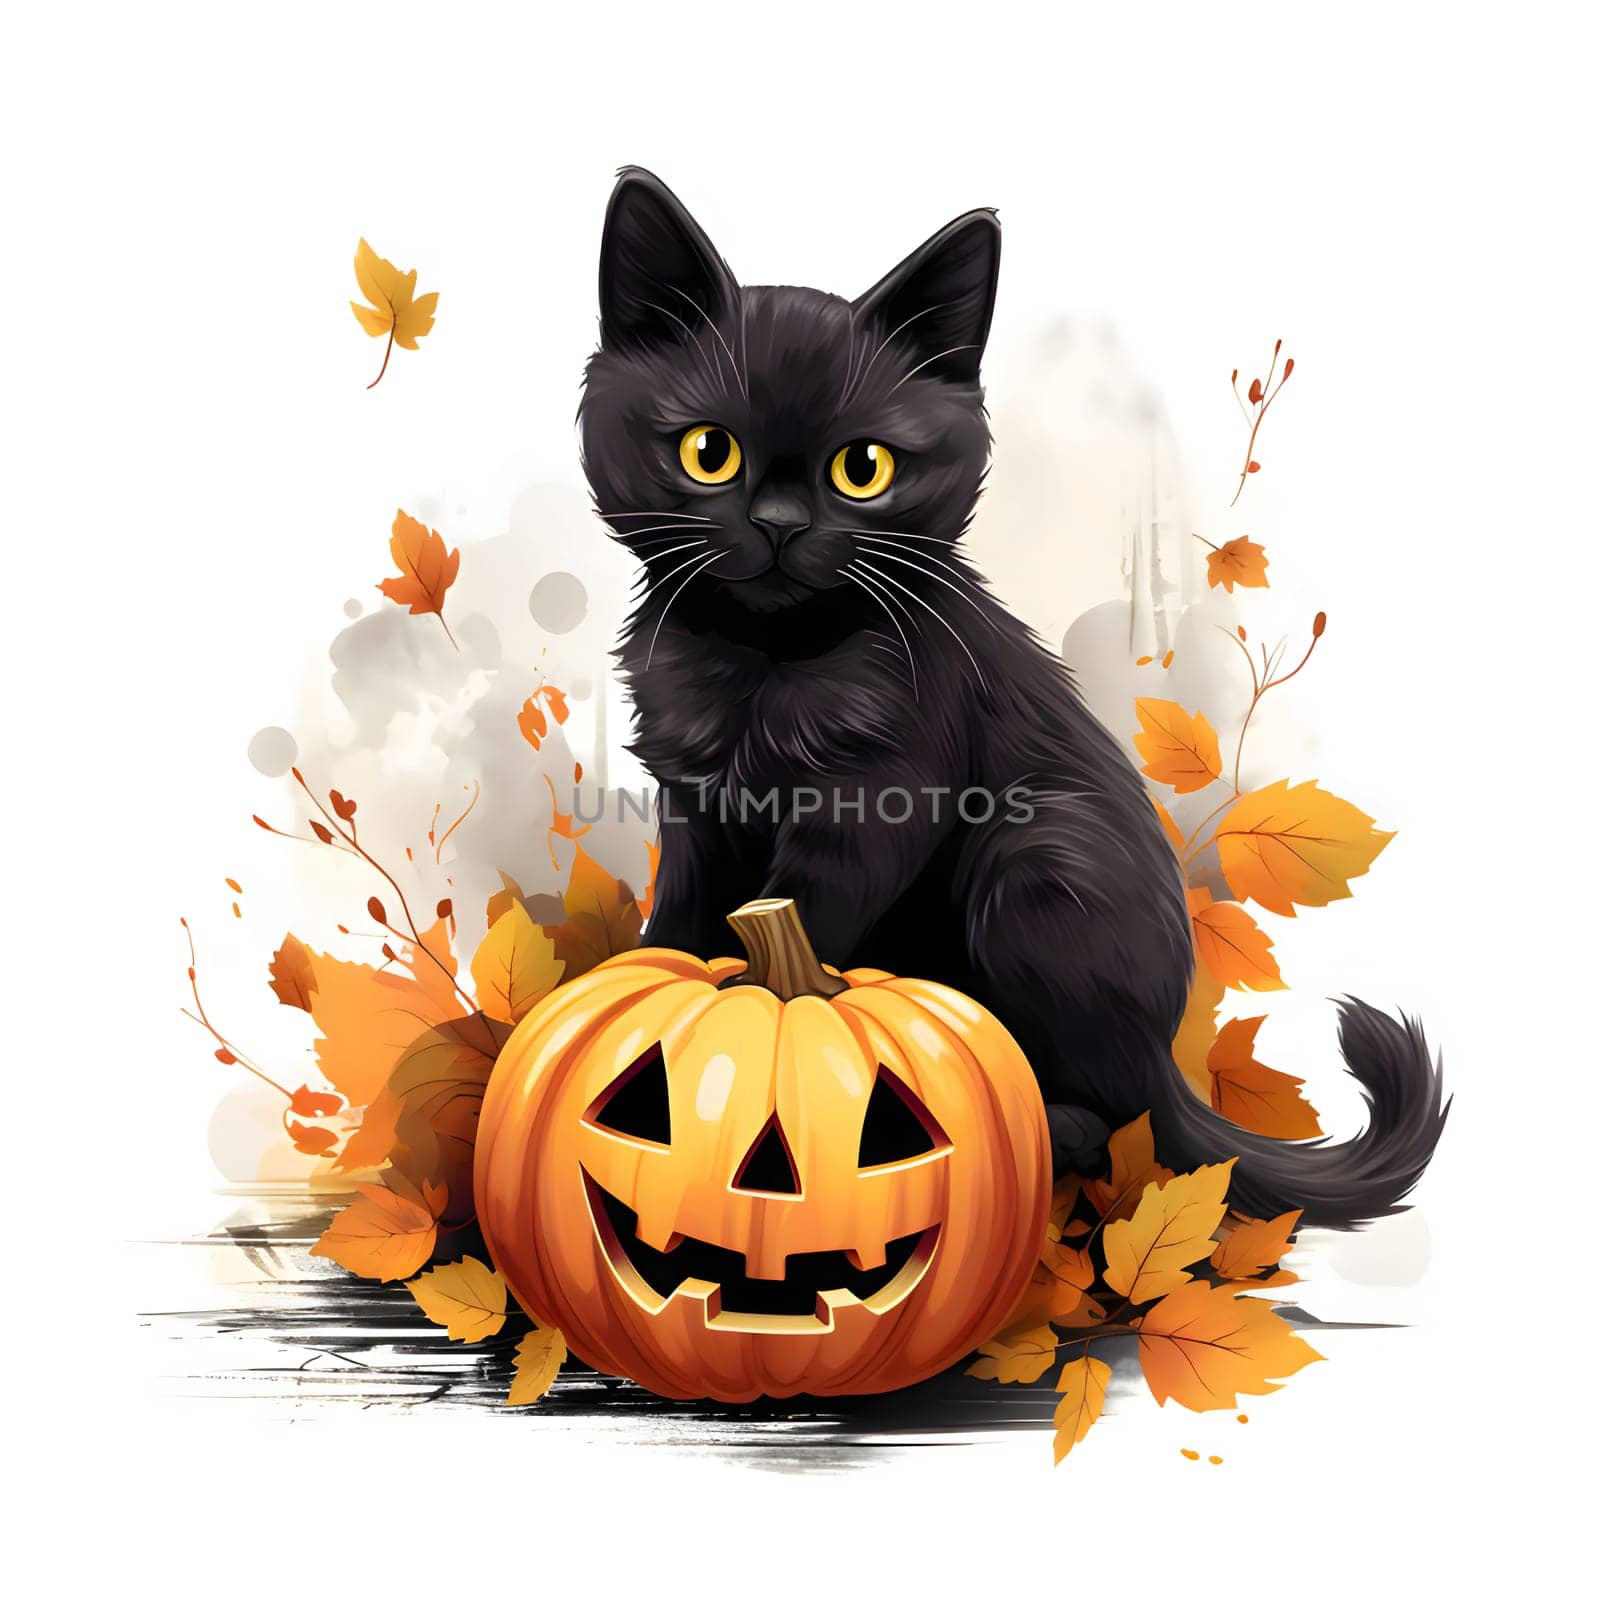 Small Black cat on leaves next to jack-o-lantern pumpkin, a Halloween image on a white isolated background. Atmosphere of darkness and fear.